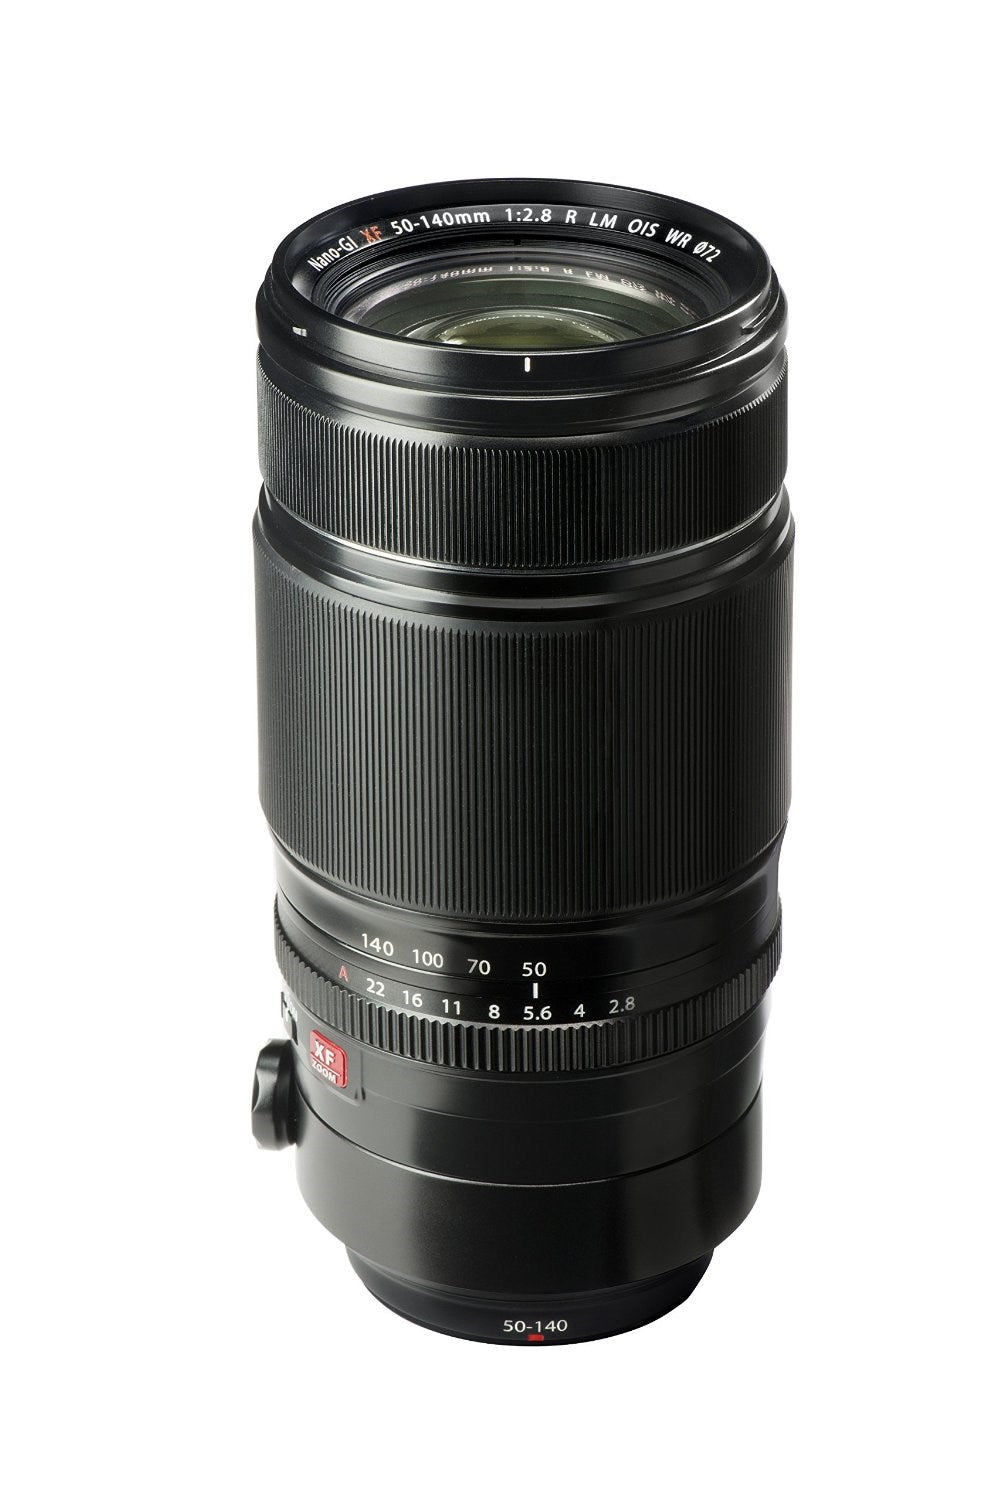 Product Image of Fujifilm XF 50-140mm f2.8 R LM OIS WR Lens